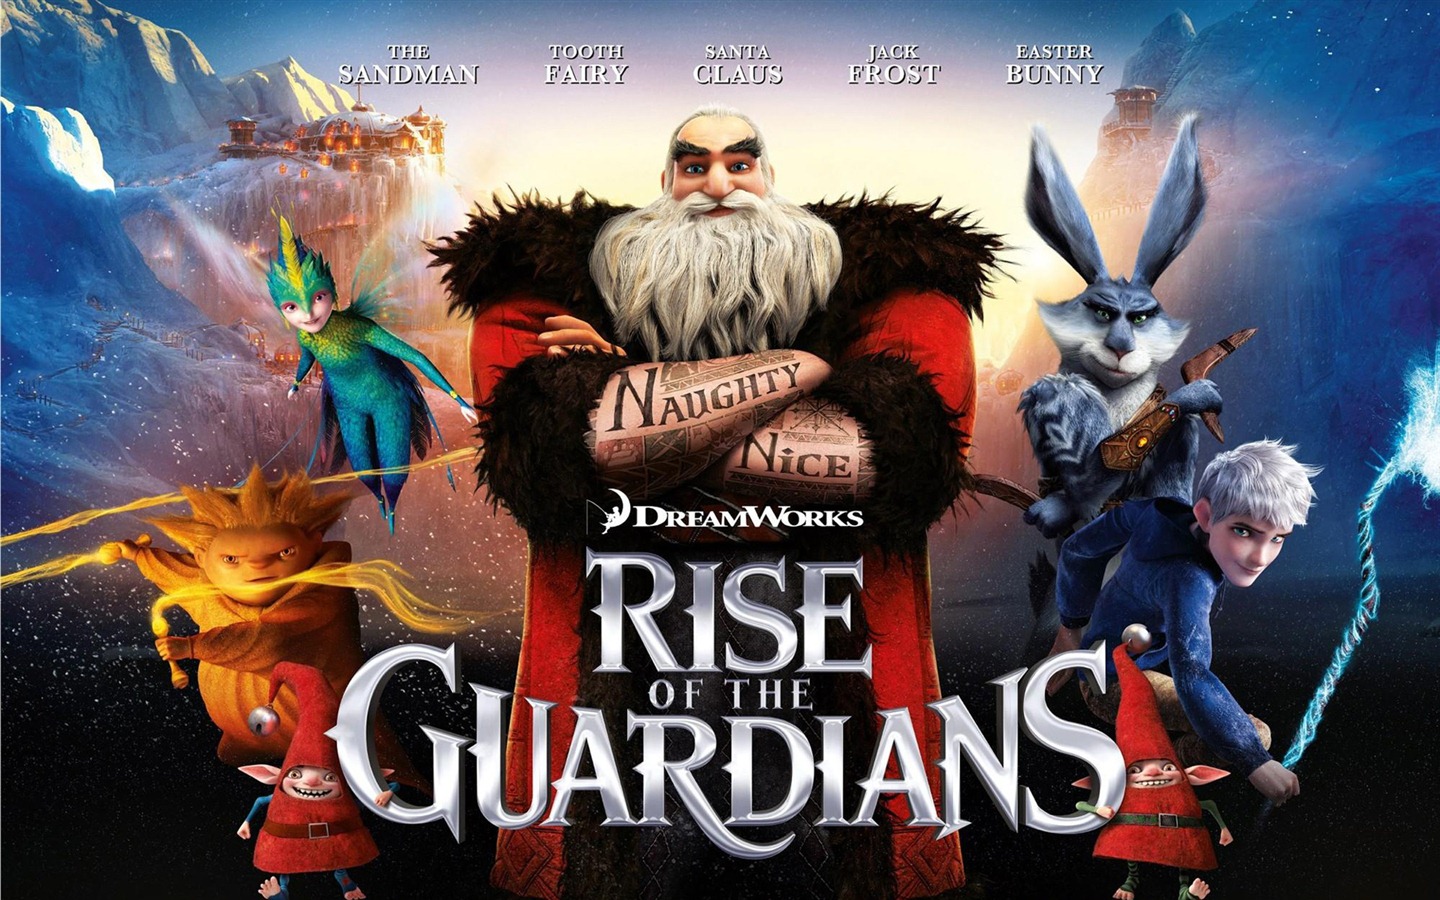 Rise of the Guardians 守護者聯盟 高清壁紙 #11 - 1440x900